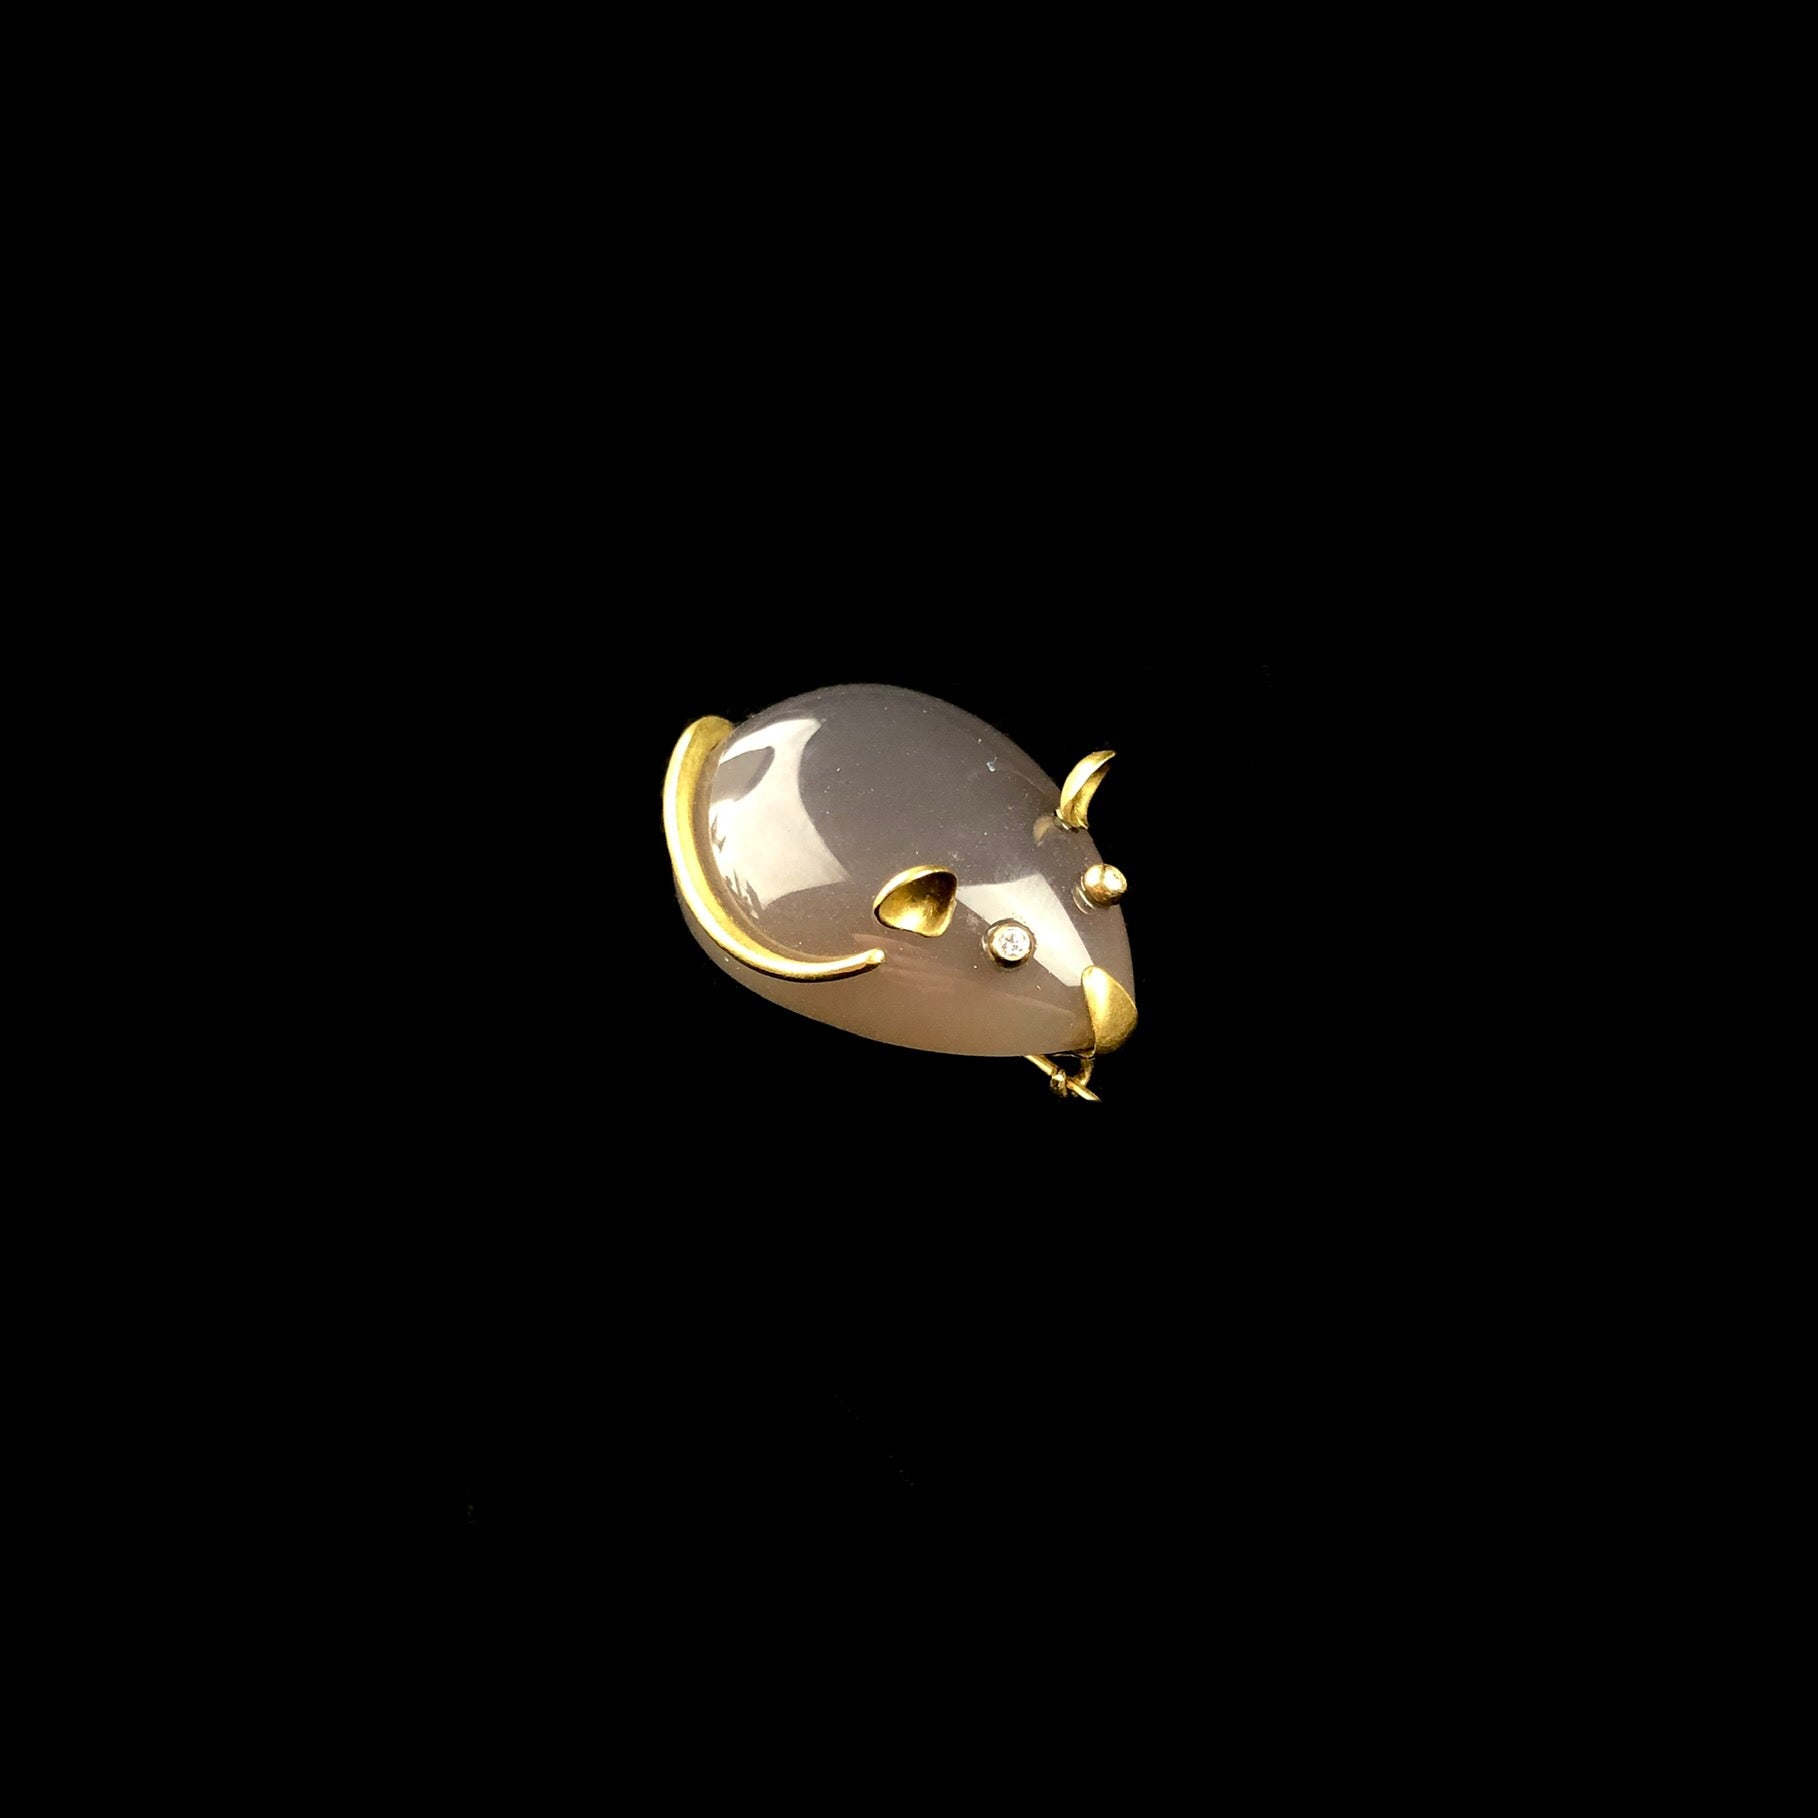 Front view of Mouse Brooch with gold tail, ears and nose